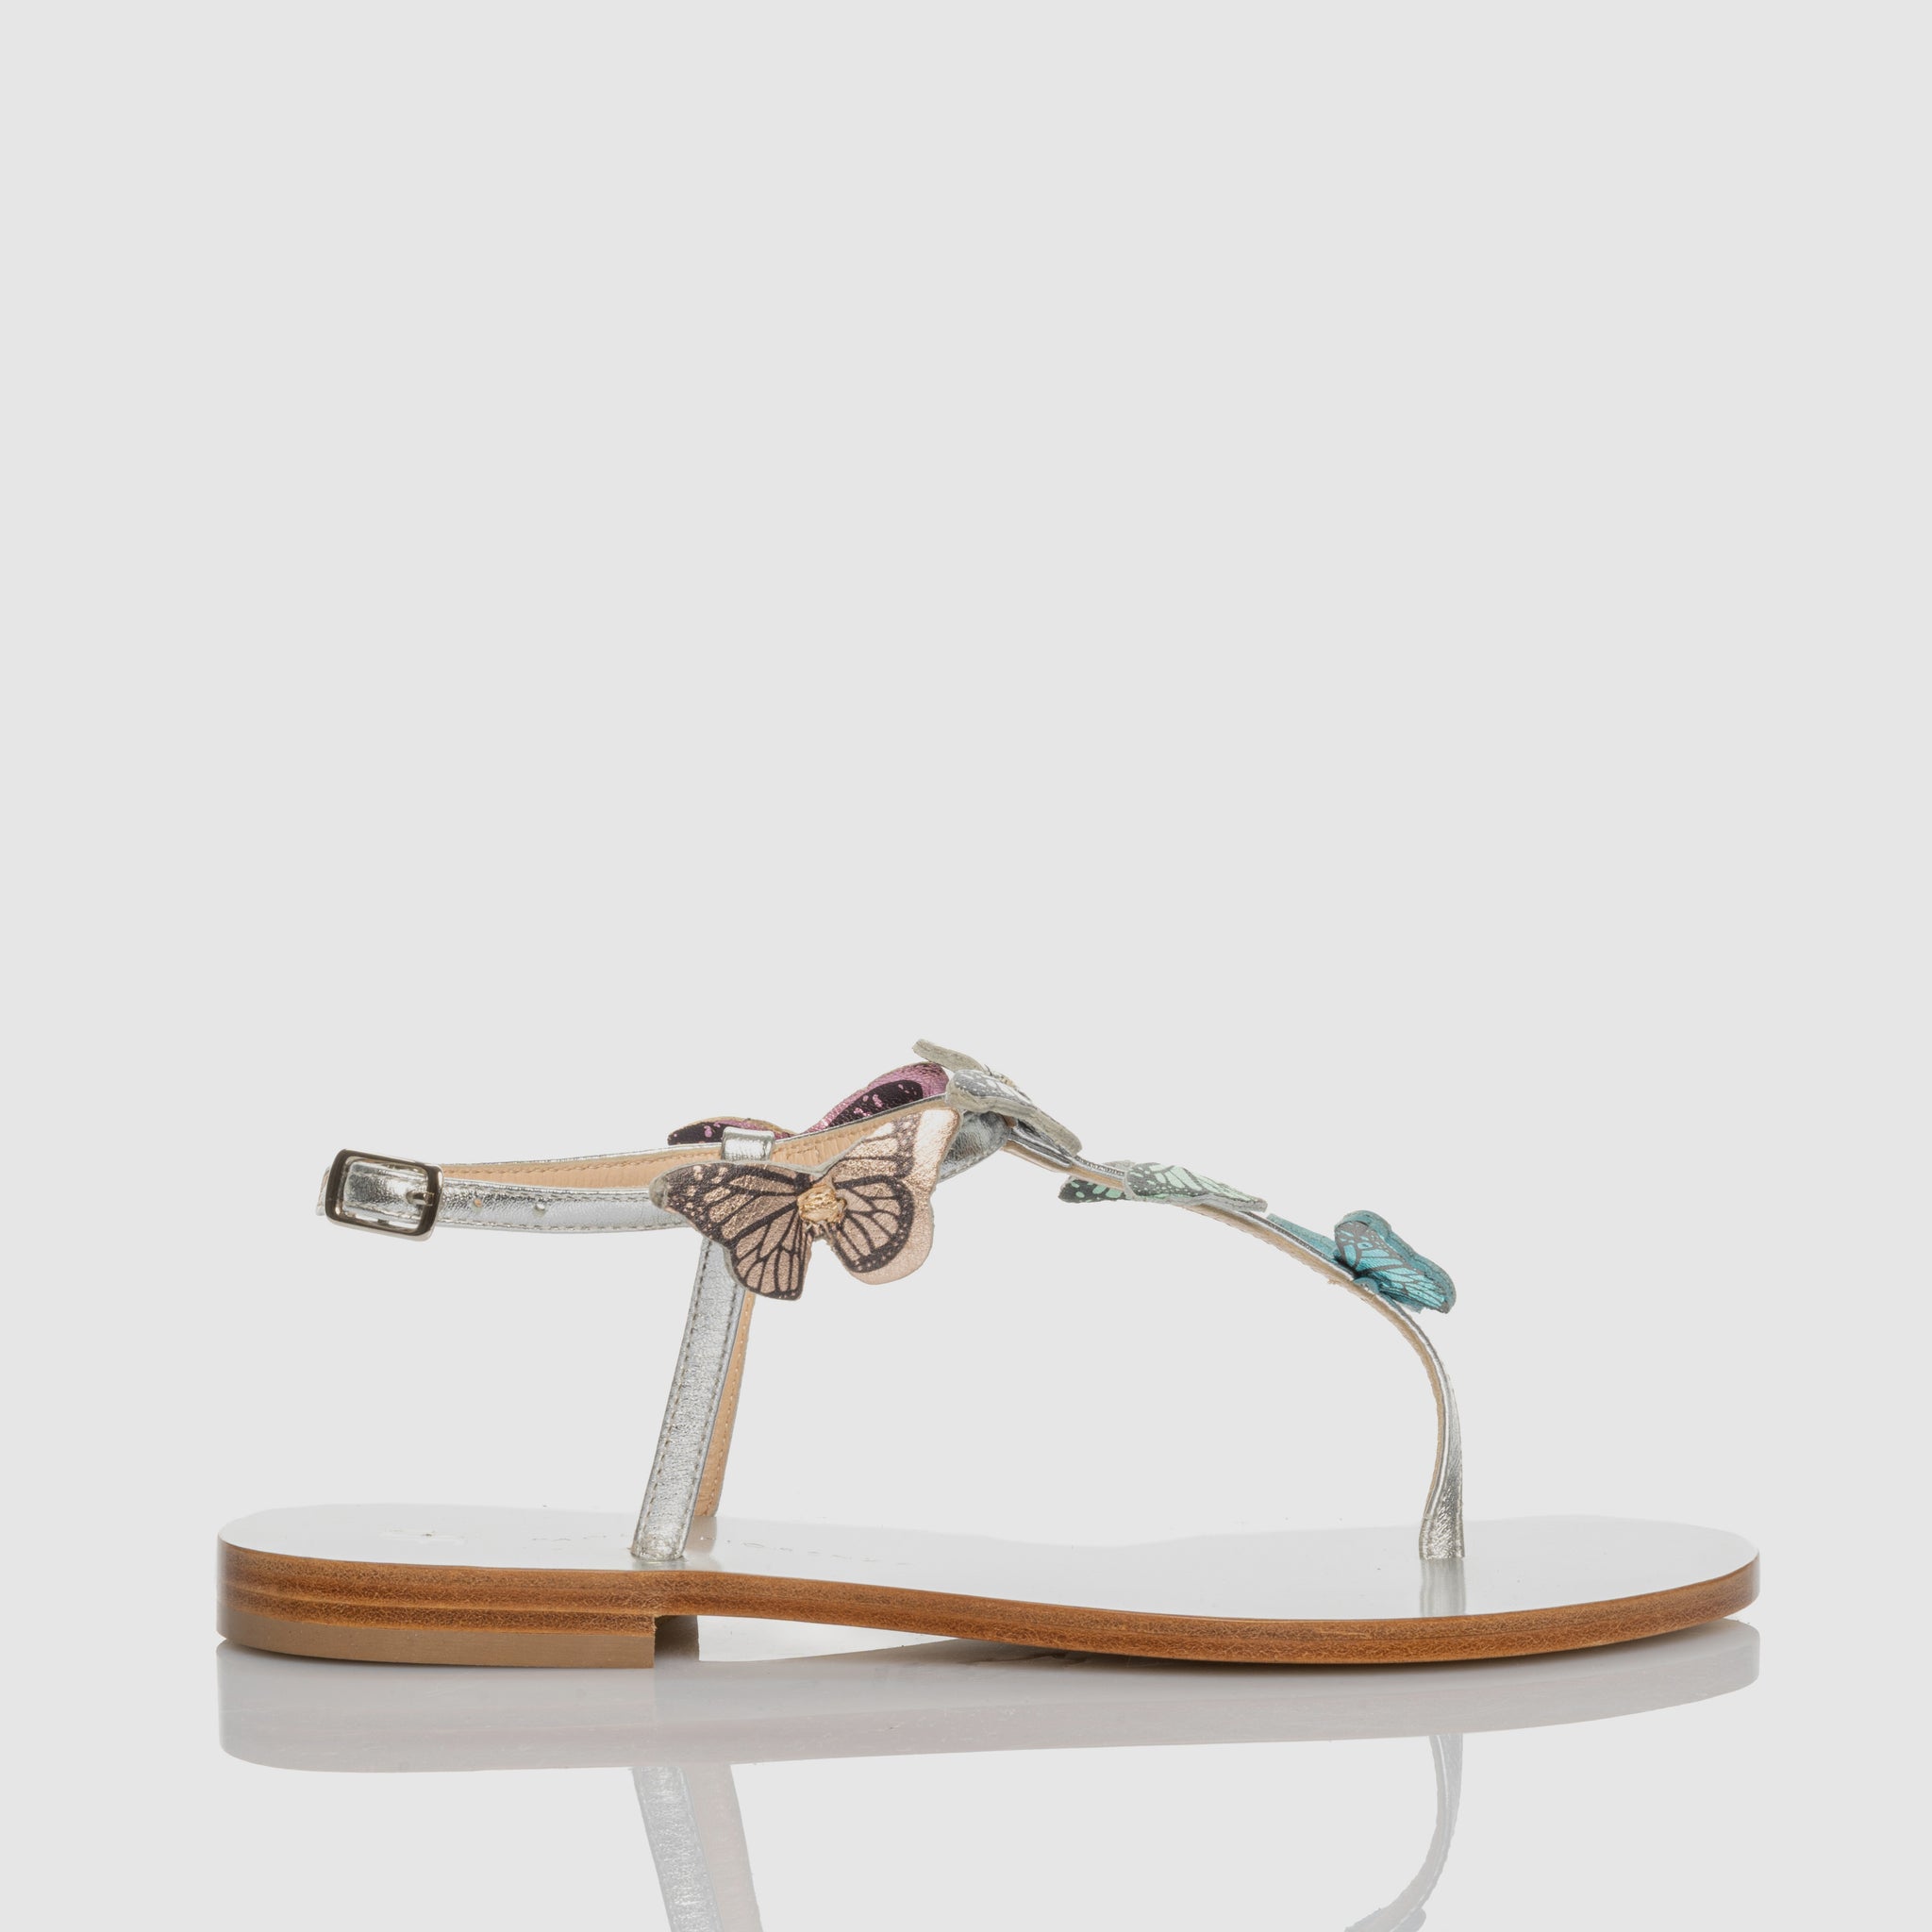 Butterfly Rainbow thong sandal in nappa leather with butterfly themed crystals